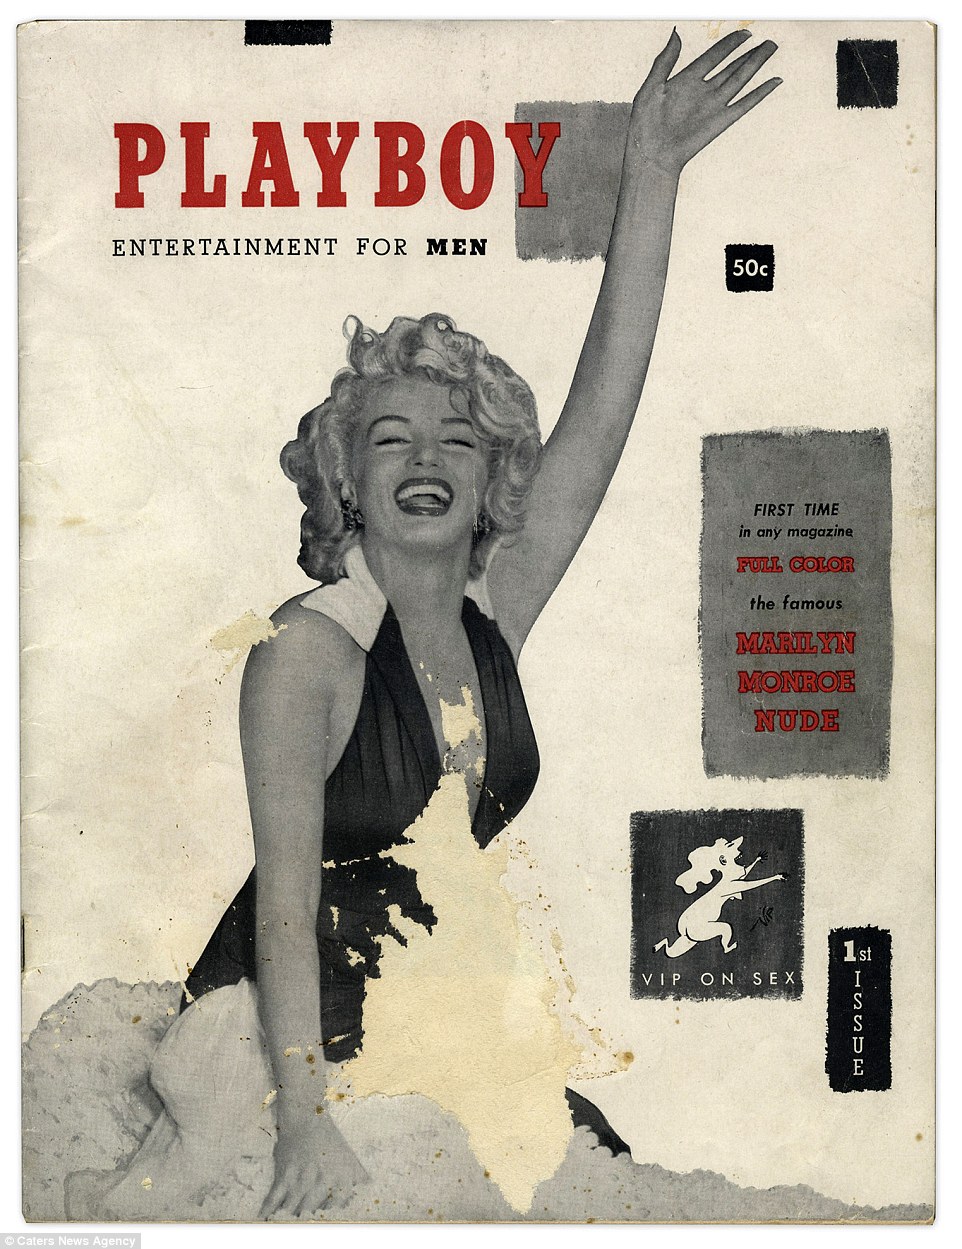 darren burchall recommends playboy screensaver: the women of playboy pic